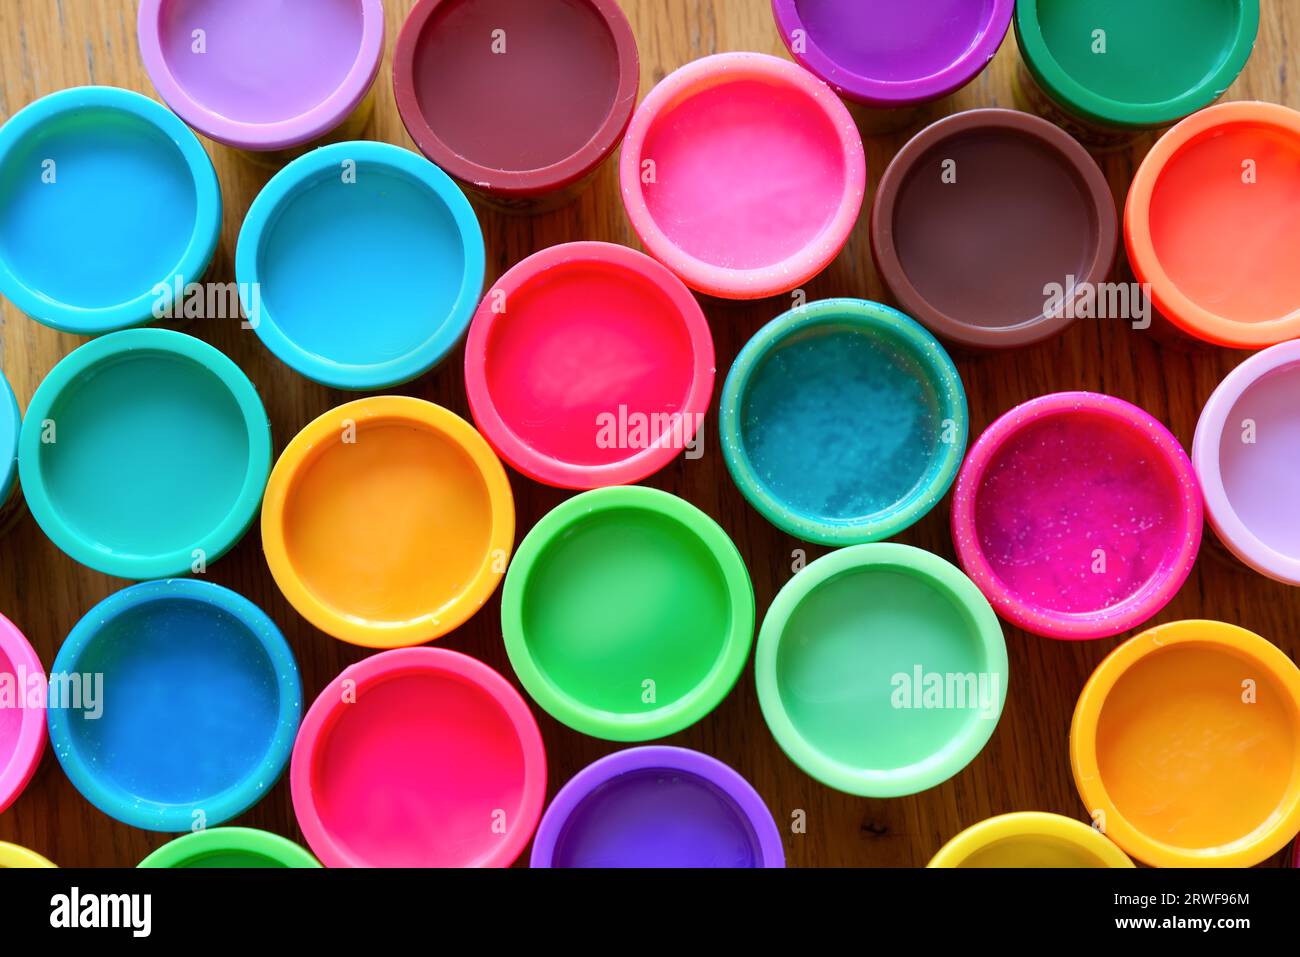 A colourful circular pattern created by multi coloured plastic tops arranged into an abstract image Stock Photo